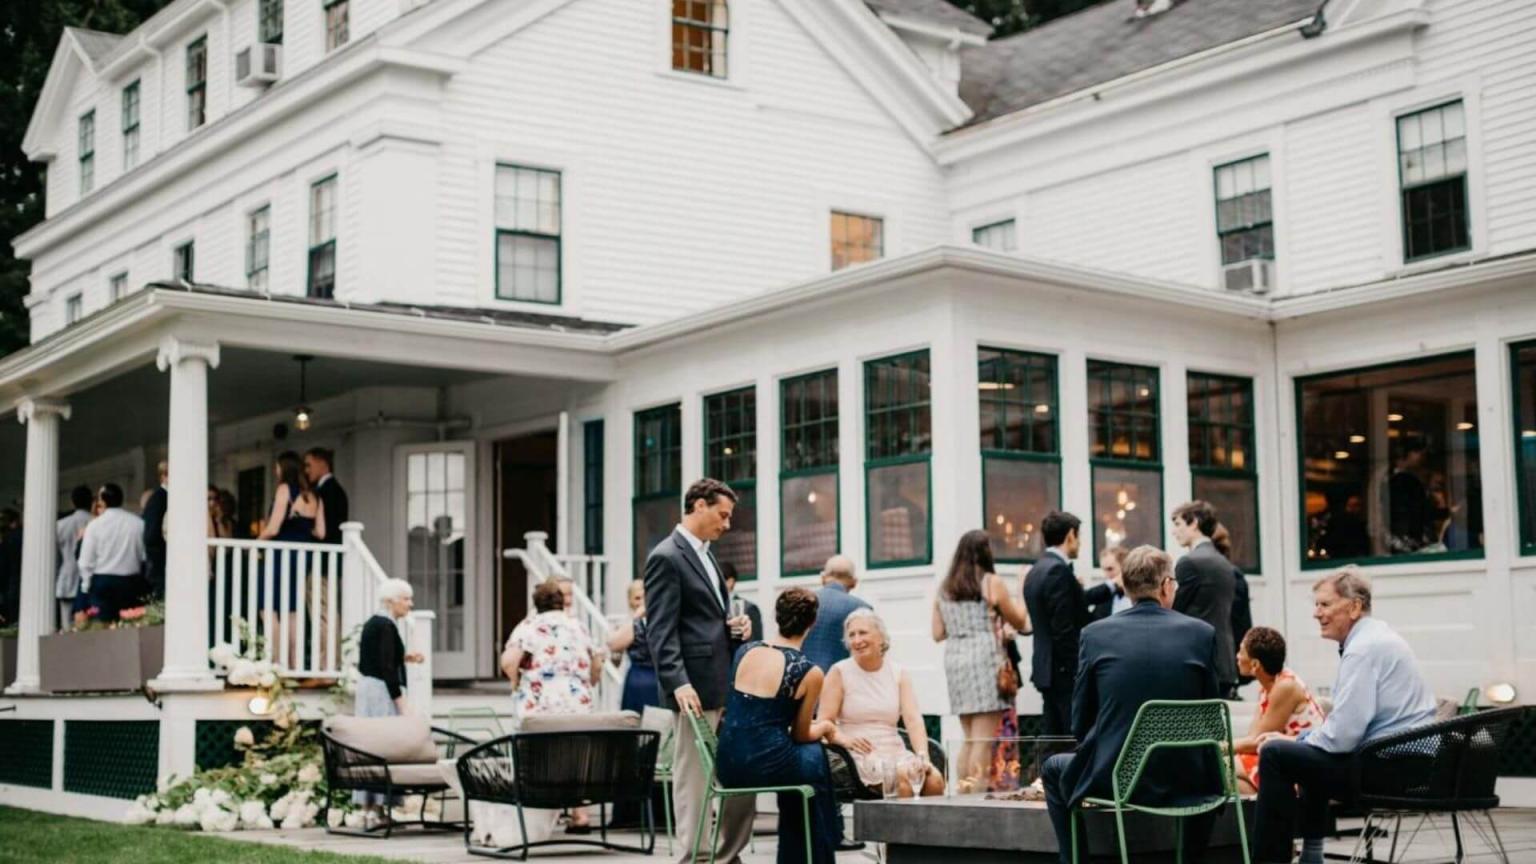 Micro Wedding Ideas and Venues | New England Inns and Resorts